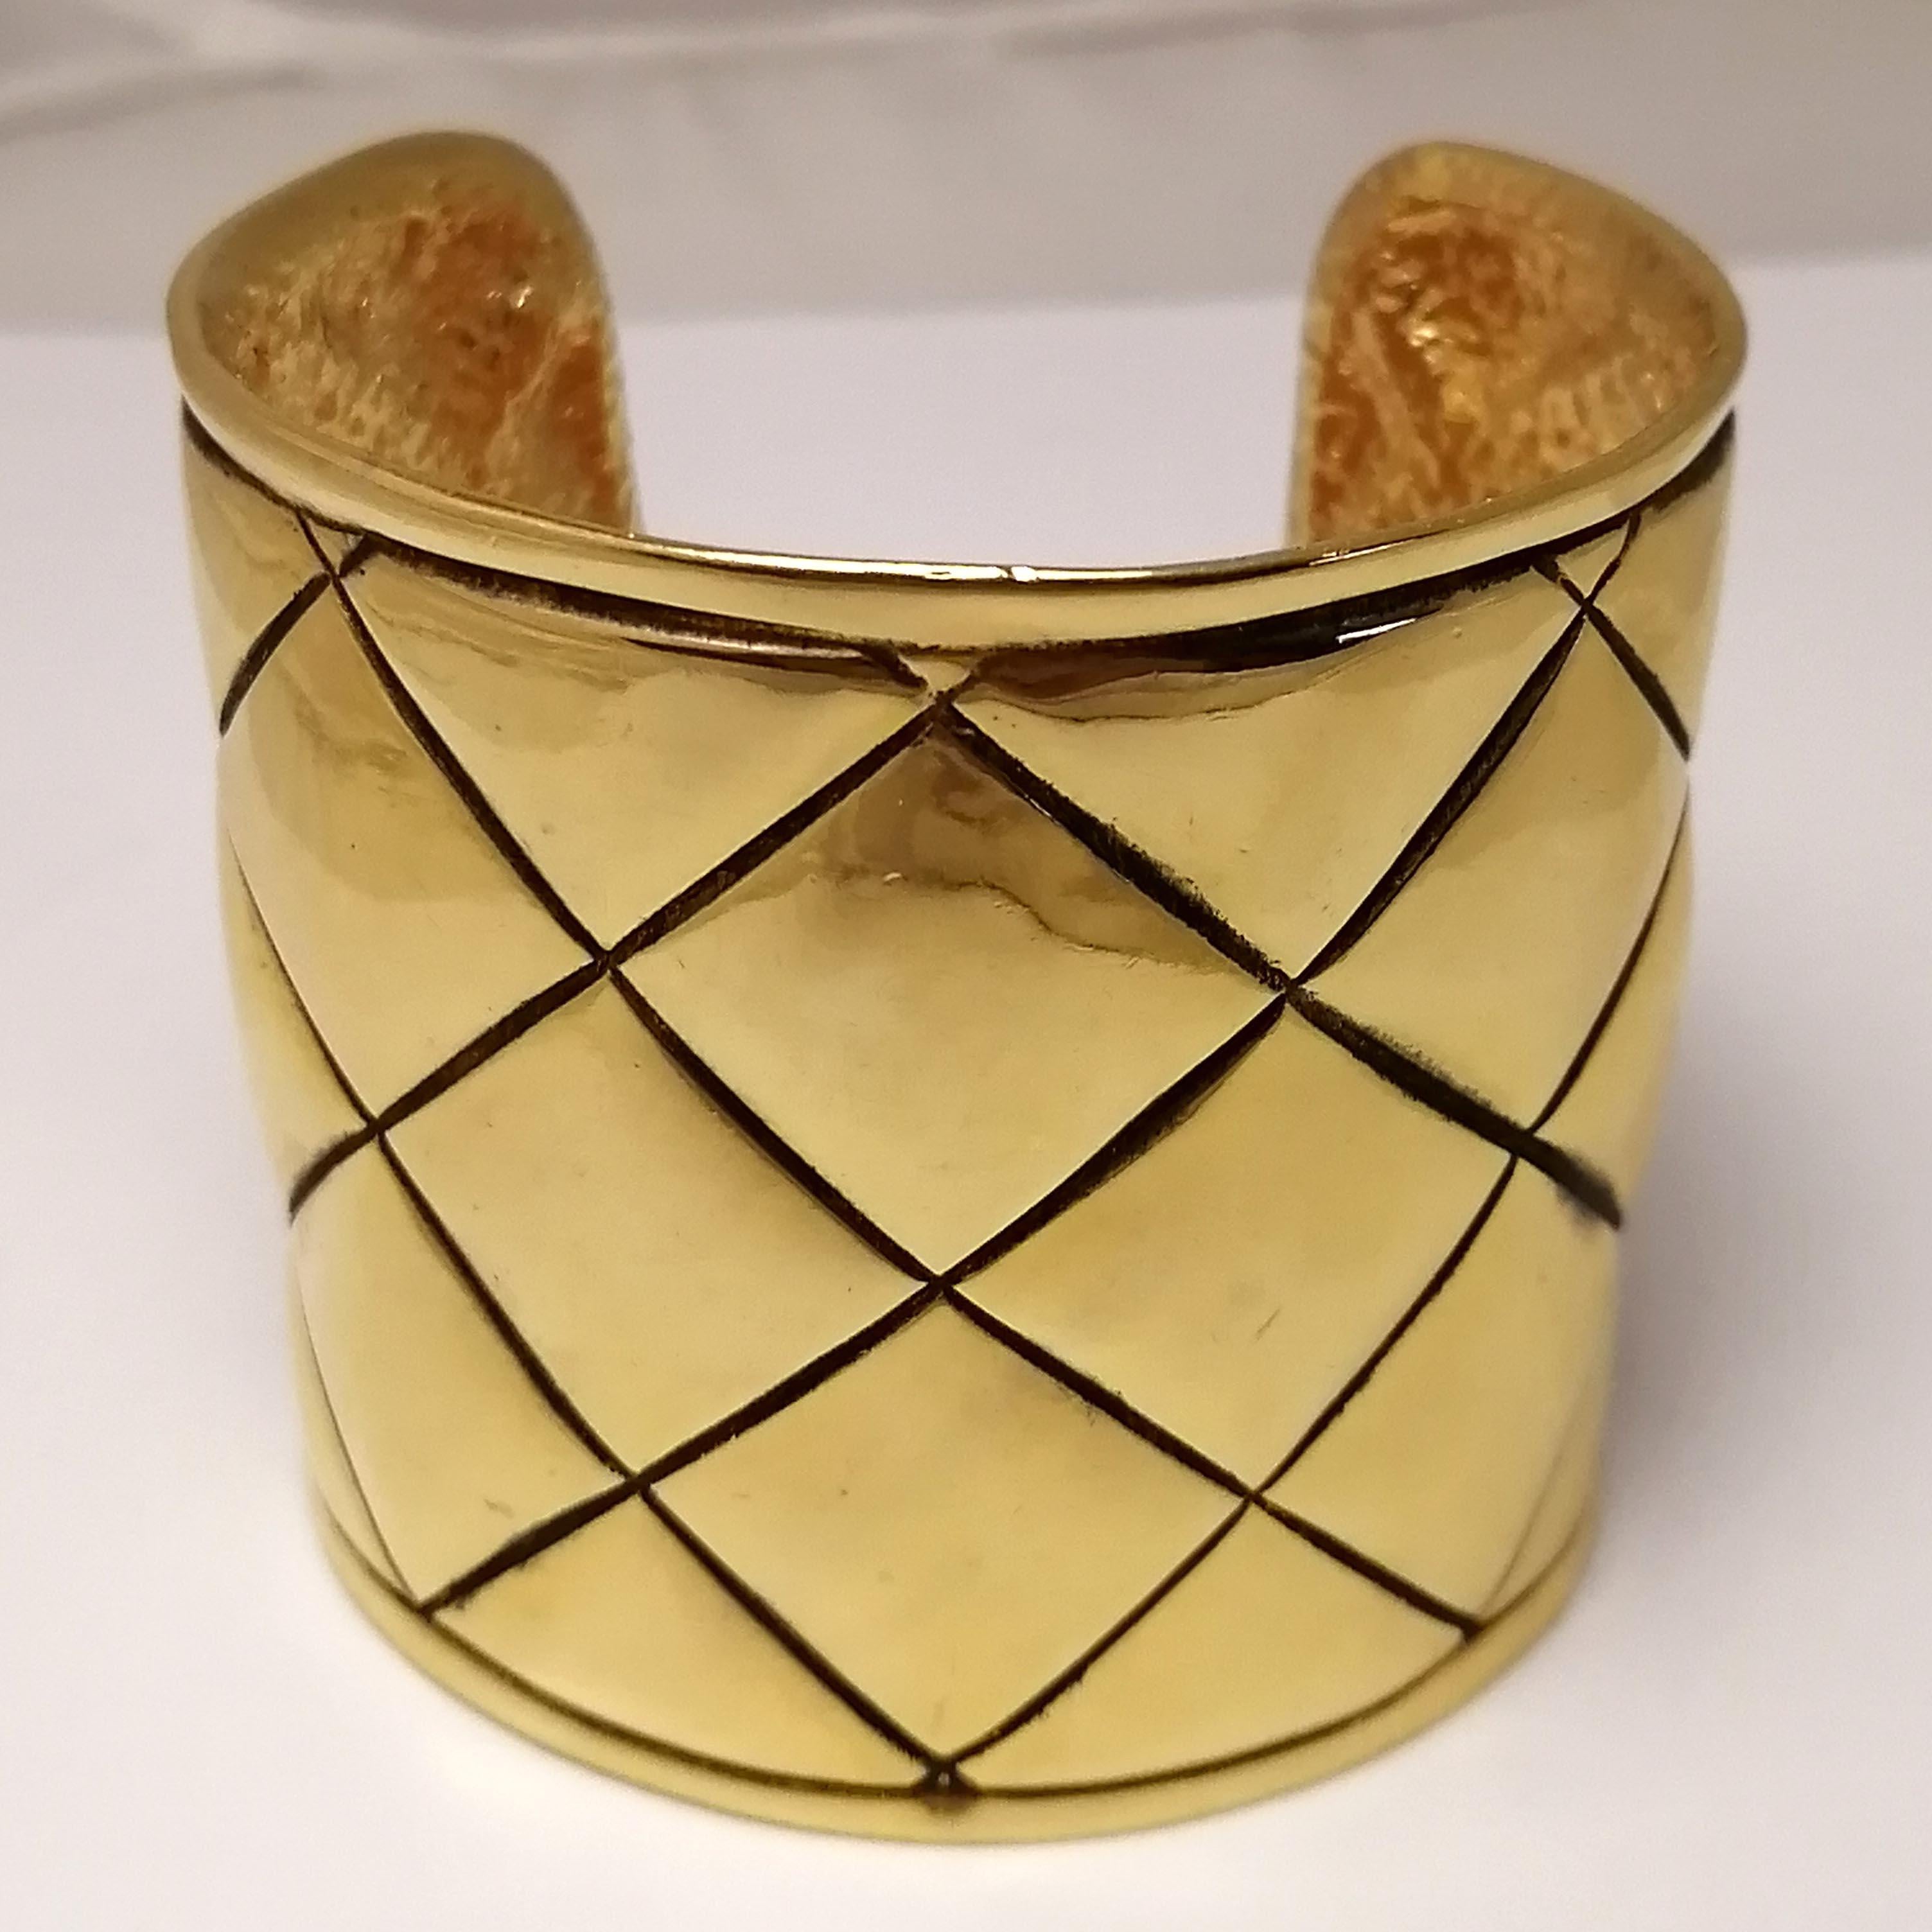 A 1980s French classic gilt metal bangle bracelet by Chanel. The rigid quilted design shows the CC logo on one of its sides and the brand's seal on the interior. It shows very mild marks of use.

Total dimensions: 6.3 x 6.8 x 5.8 cm. (2.5 x 2.63 x